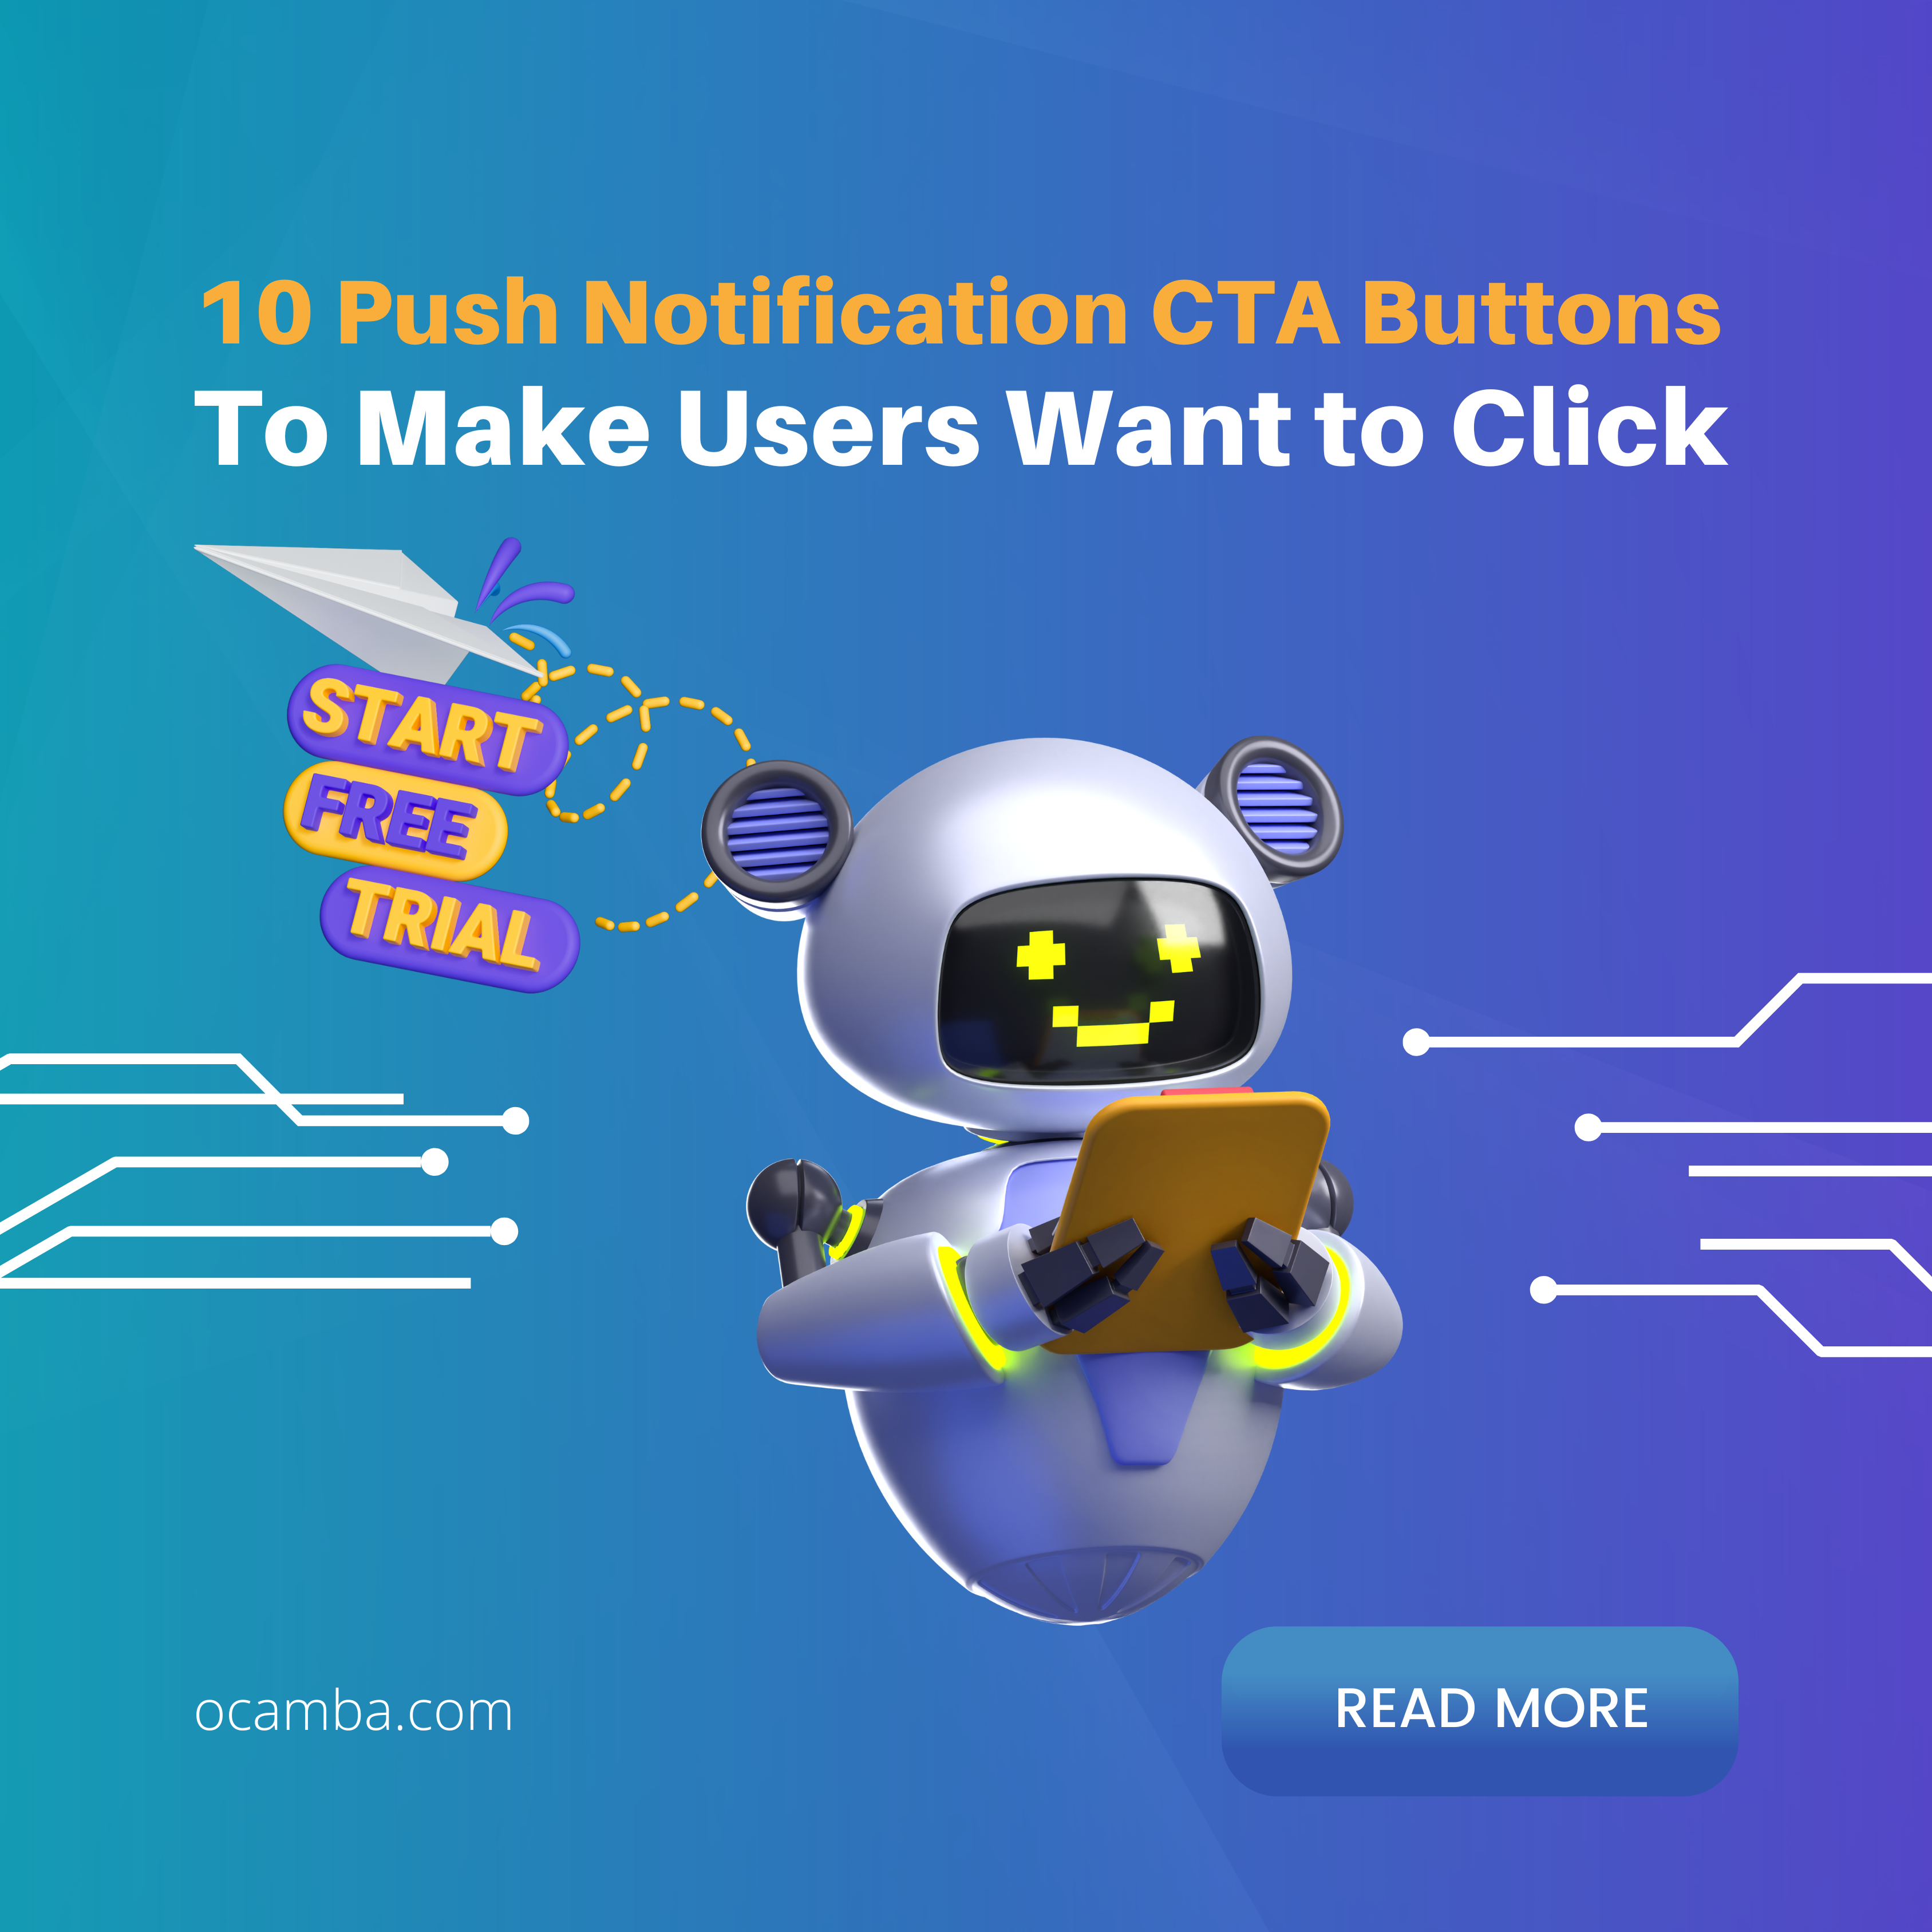  10 Push Notification CTA Buttons To Make Users Want to Click 